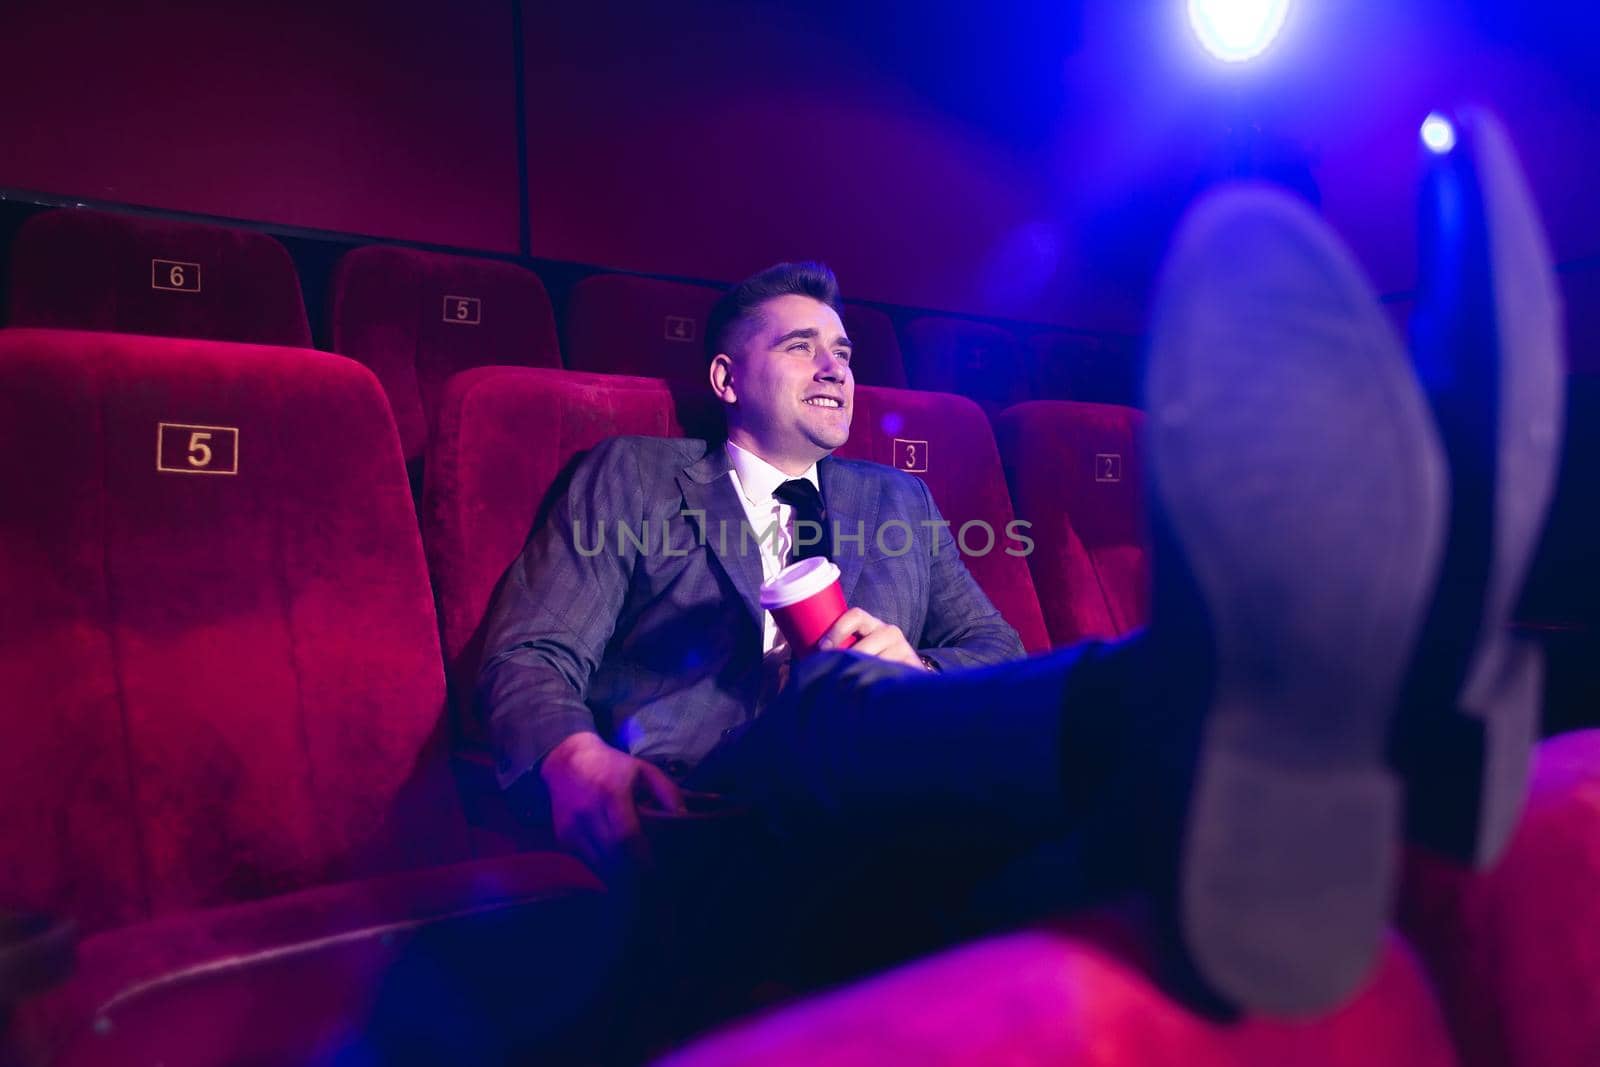 Portrait of a young, handsome man alone in a movie theater in a business suit, with his feet on the front seat and drinking through a tube from a red Cup.